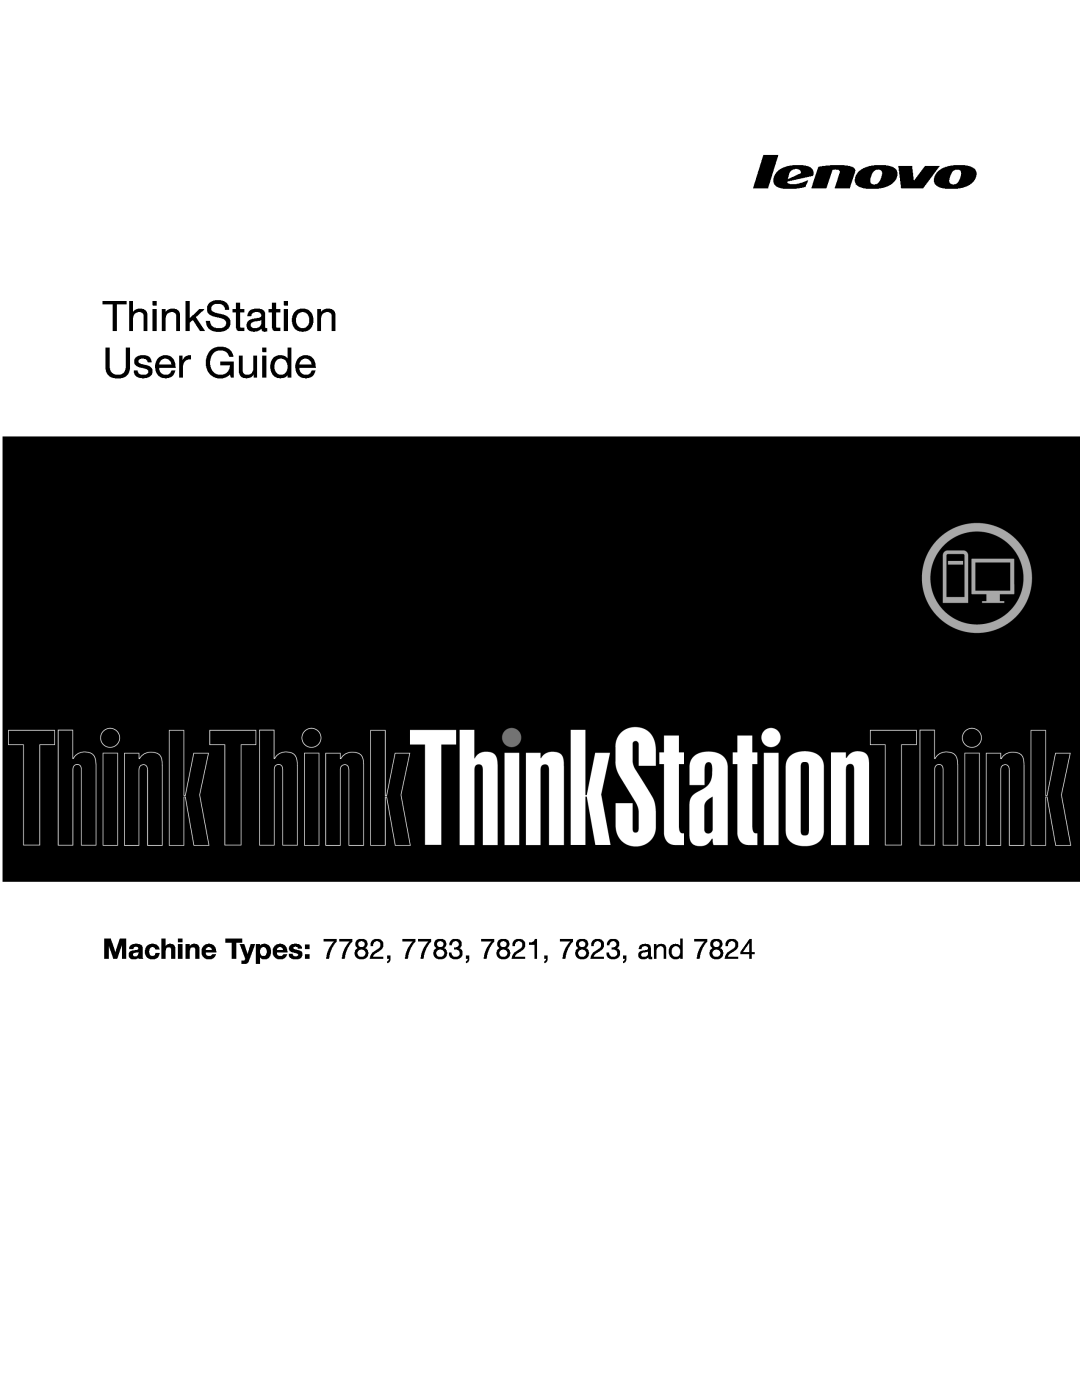 Lenovo 7824 manual ThinkStation User Guide, Machine Types 7782, 7783, 7821, 7823, and 